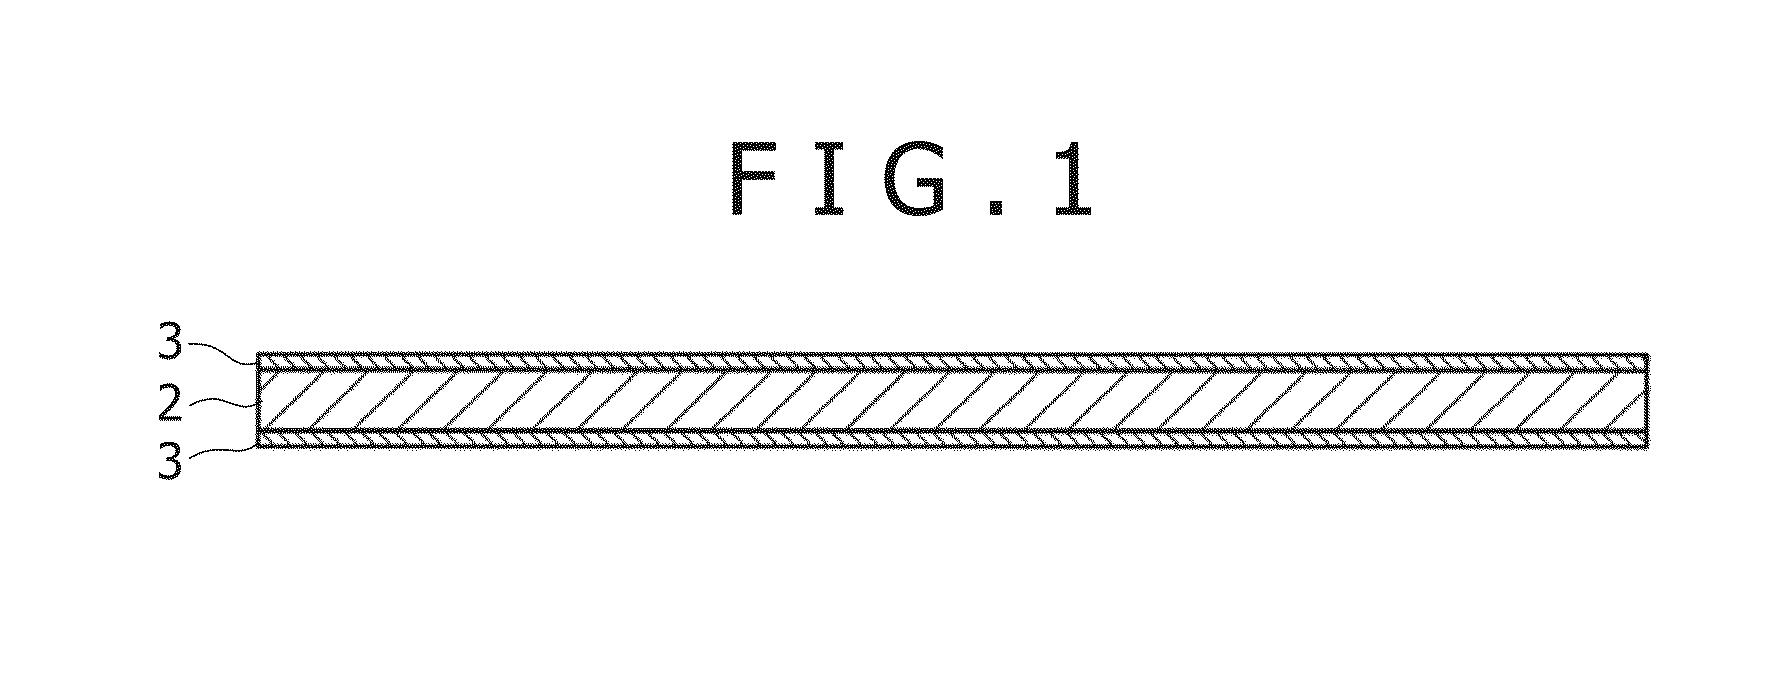 Separator, battery, battery pack, electronic apparatus, electric vehicle, electric storage device, and power system